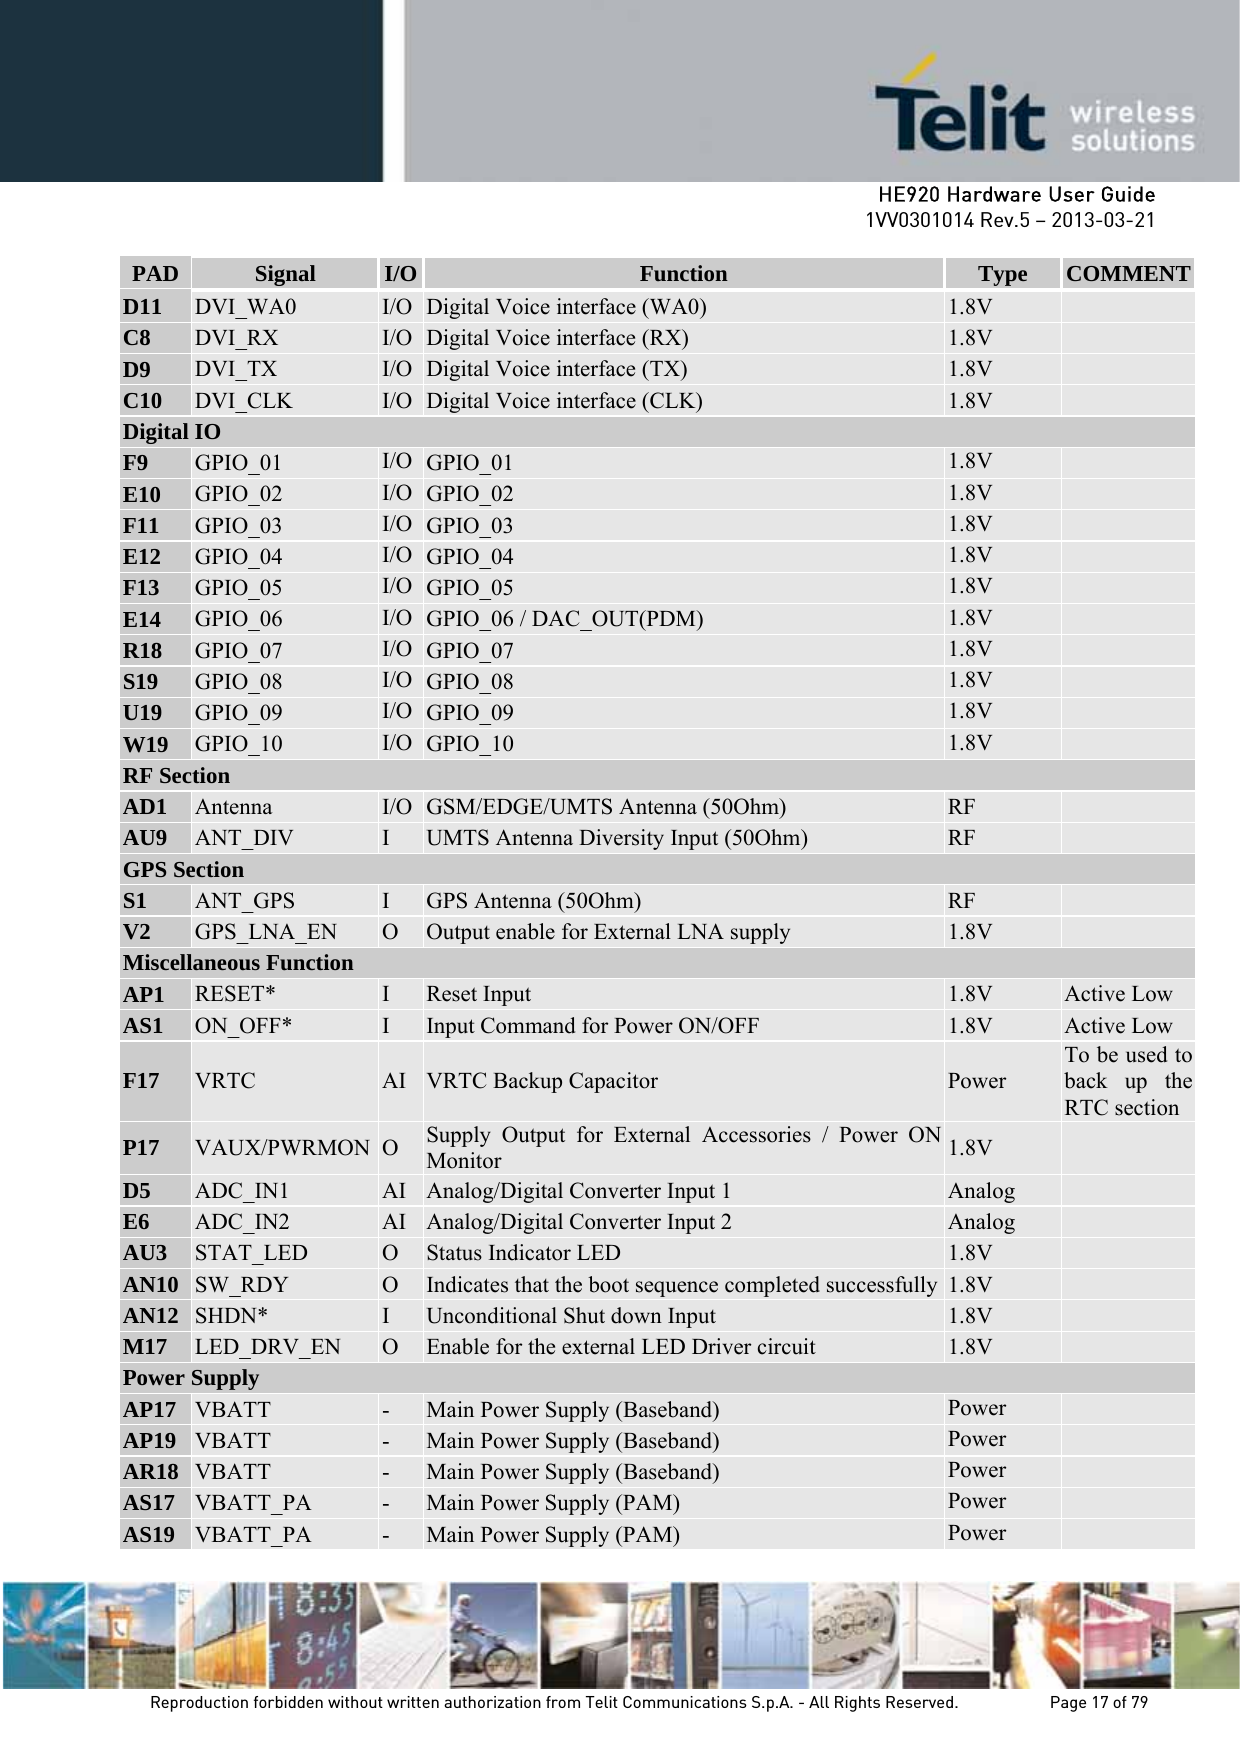     HE920 Hardware User Guide 1VV0301014 Rev.5 – 2013-03-21 Reproduction forbidden without written authorization from Telit Communications S.p.A. - All Rights Reserved.    Page 17 of 79  PAD  Signal  I/O  Function  Type  COMMENTD11  DVI_WA0  I/O  Digital Voice interface (WA0)  1.8V   C8  DVI_RX  I/O  Digital Voice interface (RX)  1.8V   D9  DVI_TX  I/O  Digital Voice interface (TX)  1.8V   C10  DVI_CLK  I/O  Digital Voice interface (CLK)  1.8V   Digital IO F9  GPIO_01  I/O  GPIO_01  1.8V   E10  GPIO_02  I/O  GPIO_02  1.8V   F11  GPIO_03  I/O  GPIO_03  1.8V   E12  GPIO_04  I/O  GPIO_04  1.8V   F13  GPIO_05  I/O  GPIO_05  1.8V   E14  GPIO_06  I/O  GPIO_06 / DAC_OUT(PDM)  1.8V   R18  GPIO_07  I/O  GPIO_07  1.8V   S19  GPIO_08  I/O  GPIO_08  1.8V   U19  GPIO_09  I/O  GPIO_09  1.8V   W19  GPIO_10  I/O  GPIO_10  1.8V   RF Section AD1  Antenna  I/O  GSM/EDGE/UMTS Antenna (50Ohm)  RF   AU9  ANT_DIV  I  UMTS Antenna Diversity Input (50Ohm)  RF   GPS Section S1  ANT_GPS  I  GPS Antenna (50Ohm)  RF   V2  GPS_LNA_EN  O  Output enable for External LNA supply  1.8V   Miscellaneous Function AP1  RESET*  I  Reset Input  1.8V  Active Low AS1  ON_OFF*  I  Input Command for Power ON/OFF  1.8V  Active Low F17  VRTC  AI  VRTC Backup Capacitor  Power To be used to back up the RTC sectionP17  VAUX/PWRMON O  Supply Output for External Accessories / Power ON Monitor  1.8V   D5  ADC_IN1  AI  Analog/Digital Converter Input 1  Analog   E6  ADC_IN2  AI  Analog/Digital Converter Input 2  Analog   AU3  STAT_LED  O  Status Indicator LED  1.8V   AN10  SW_RDY  O  Indicates that the boot sequence completed successfully  1.8V   AN12  SHDN*  I  Unconditional Shut down Input  1.8V   M17  LED_DRV_EN  O  Enable for the external LED Driver circuit  1.8V   Power Supply AP17  VBATT  -  Main Power Supply (Baseband)  Power   AP19  VBATT  -  Main Power Supply (Baseband)  Power   AR18  VBATT  -  Main Power Supply (Baseband)  Power   AS17  VBATT_PA  -  Main Power Supply (PAM)  Power   AS19  VBATT_PA  -  Main Power Supply (PAM)  Power   